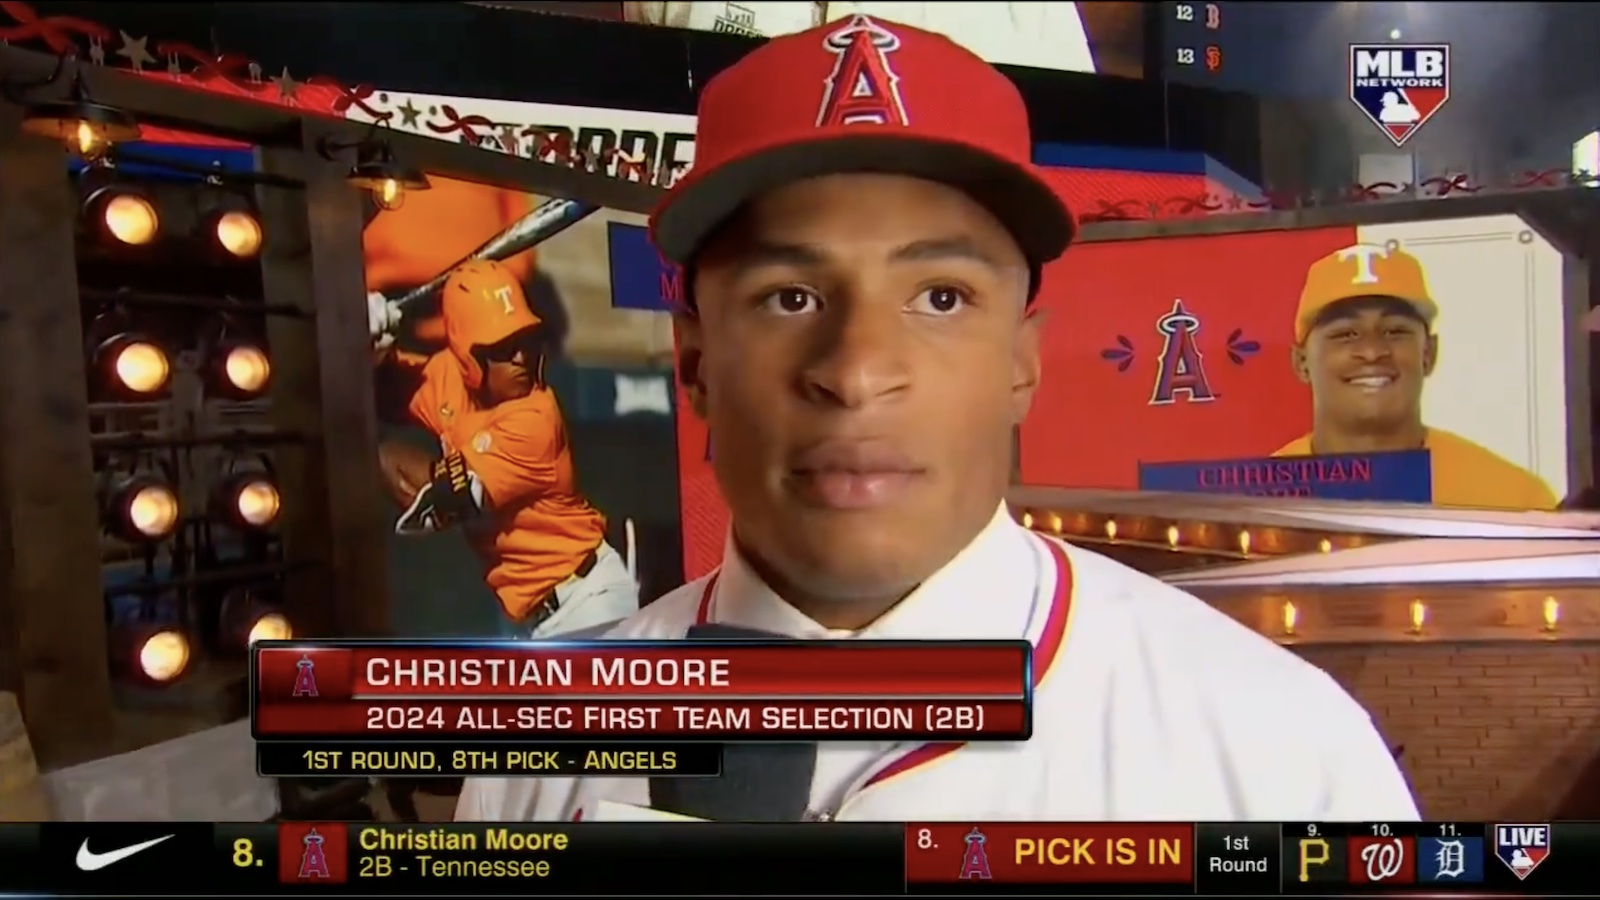 Fans made the same joke about the Angels’ World Series guarantee candidate